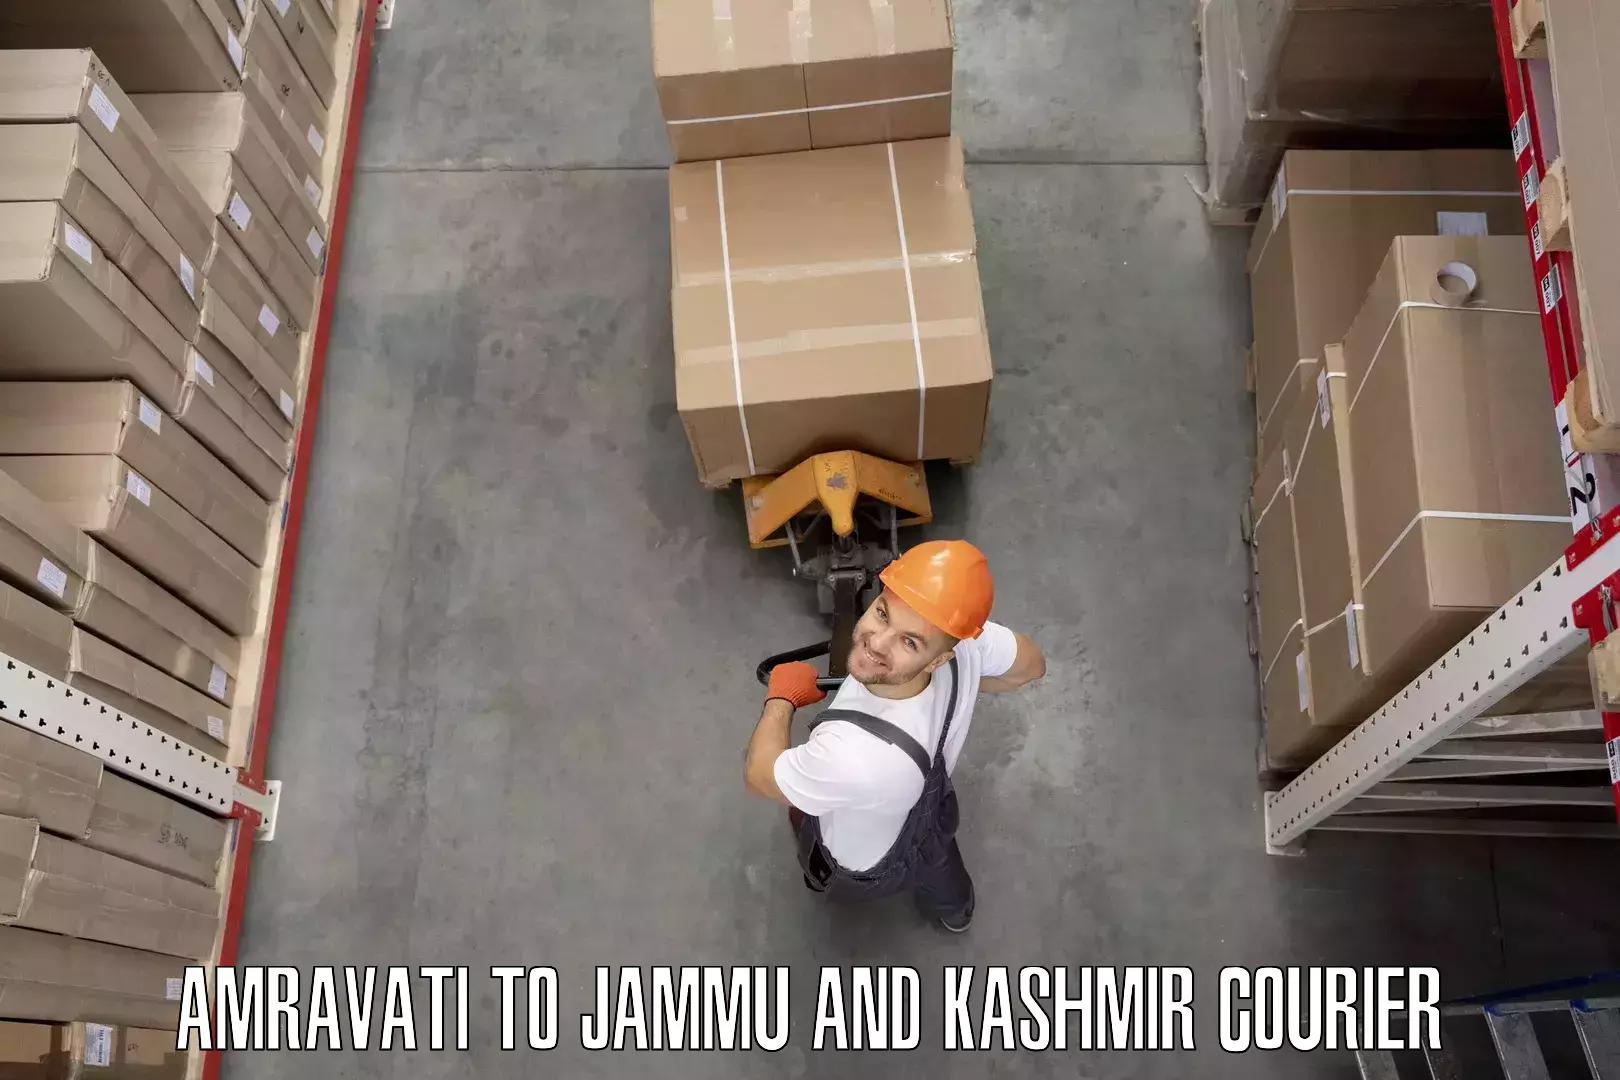 Furniture delivery service Amravati to Poonch